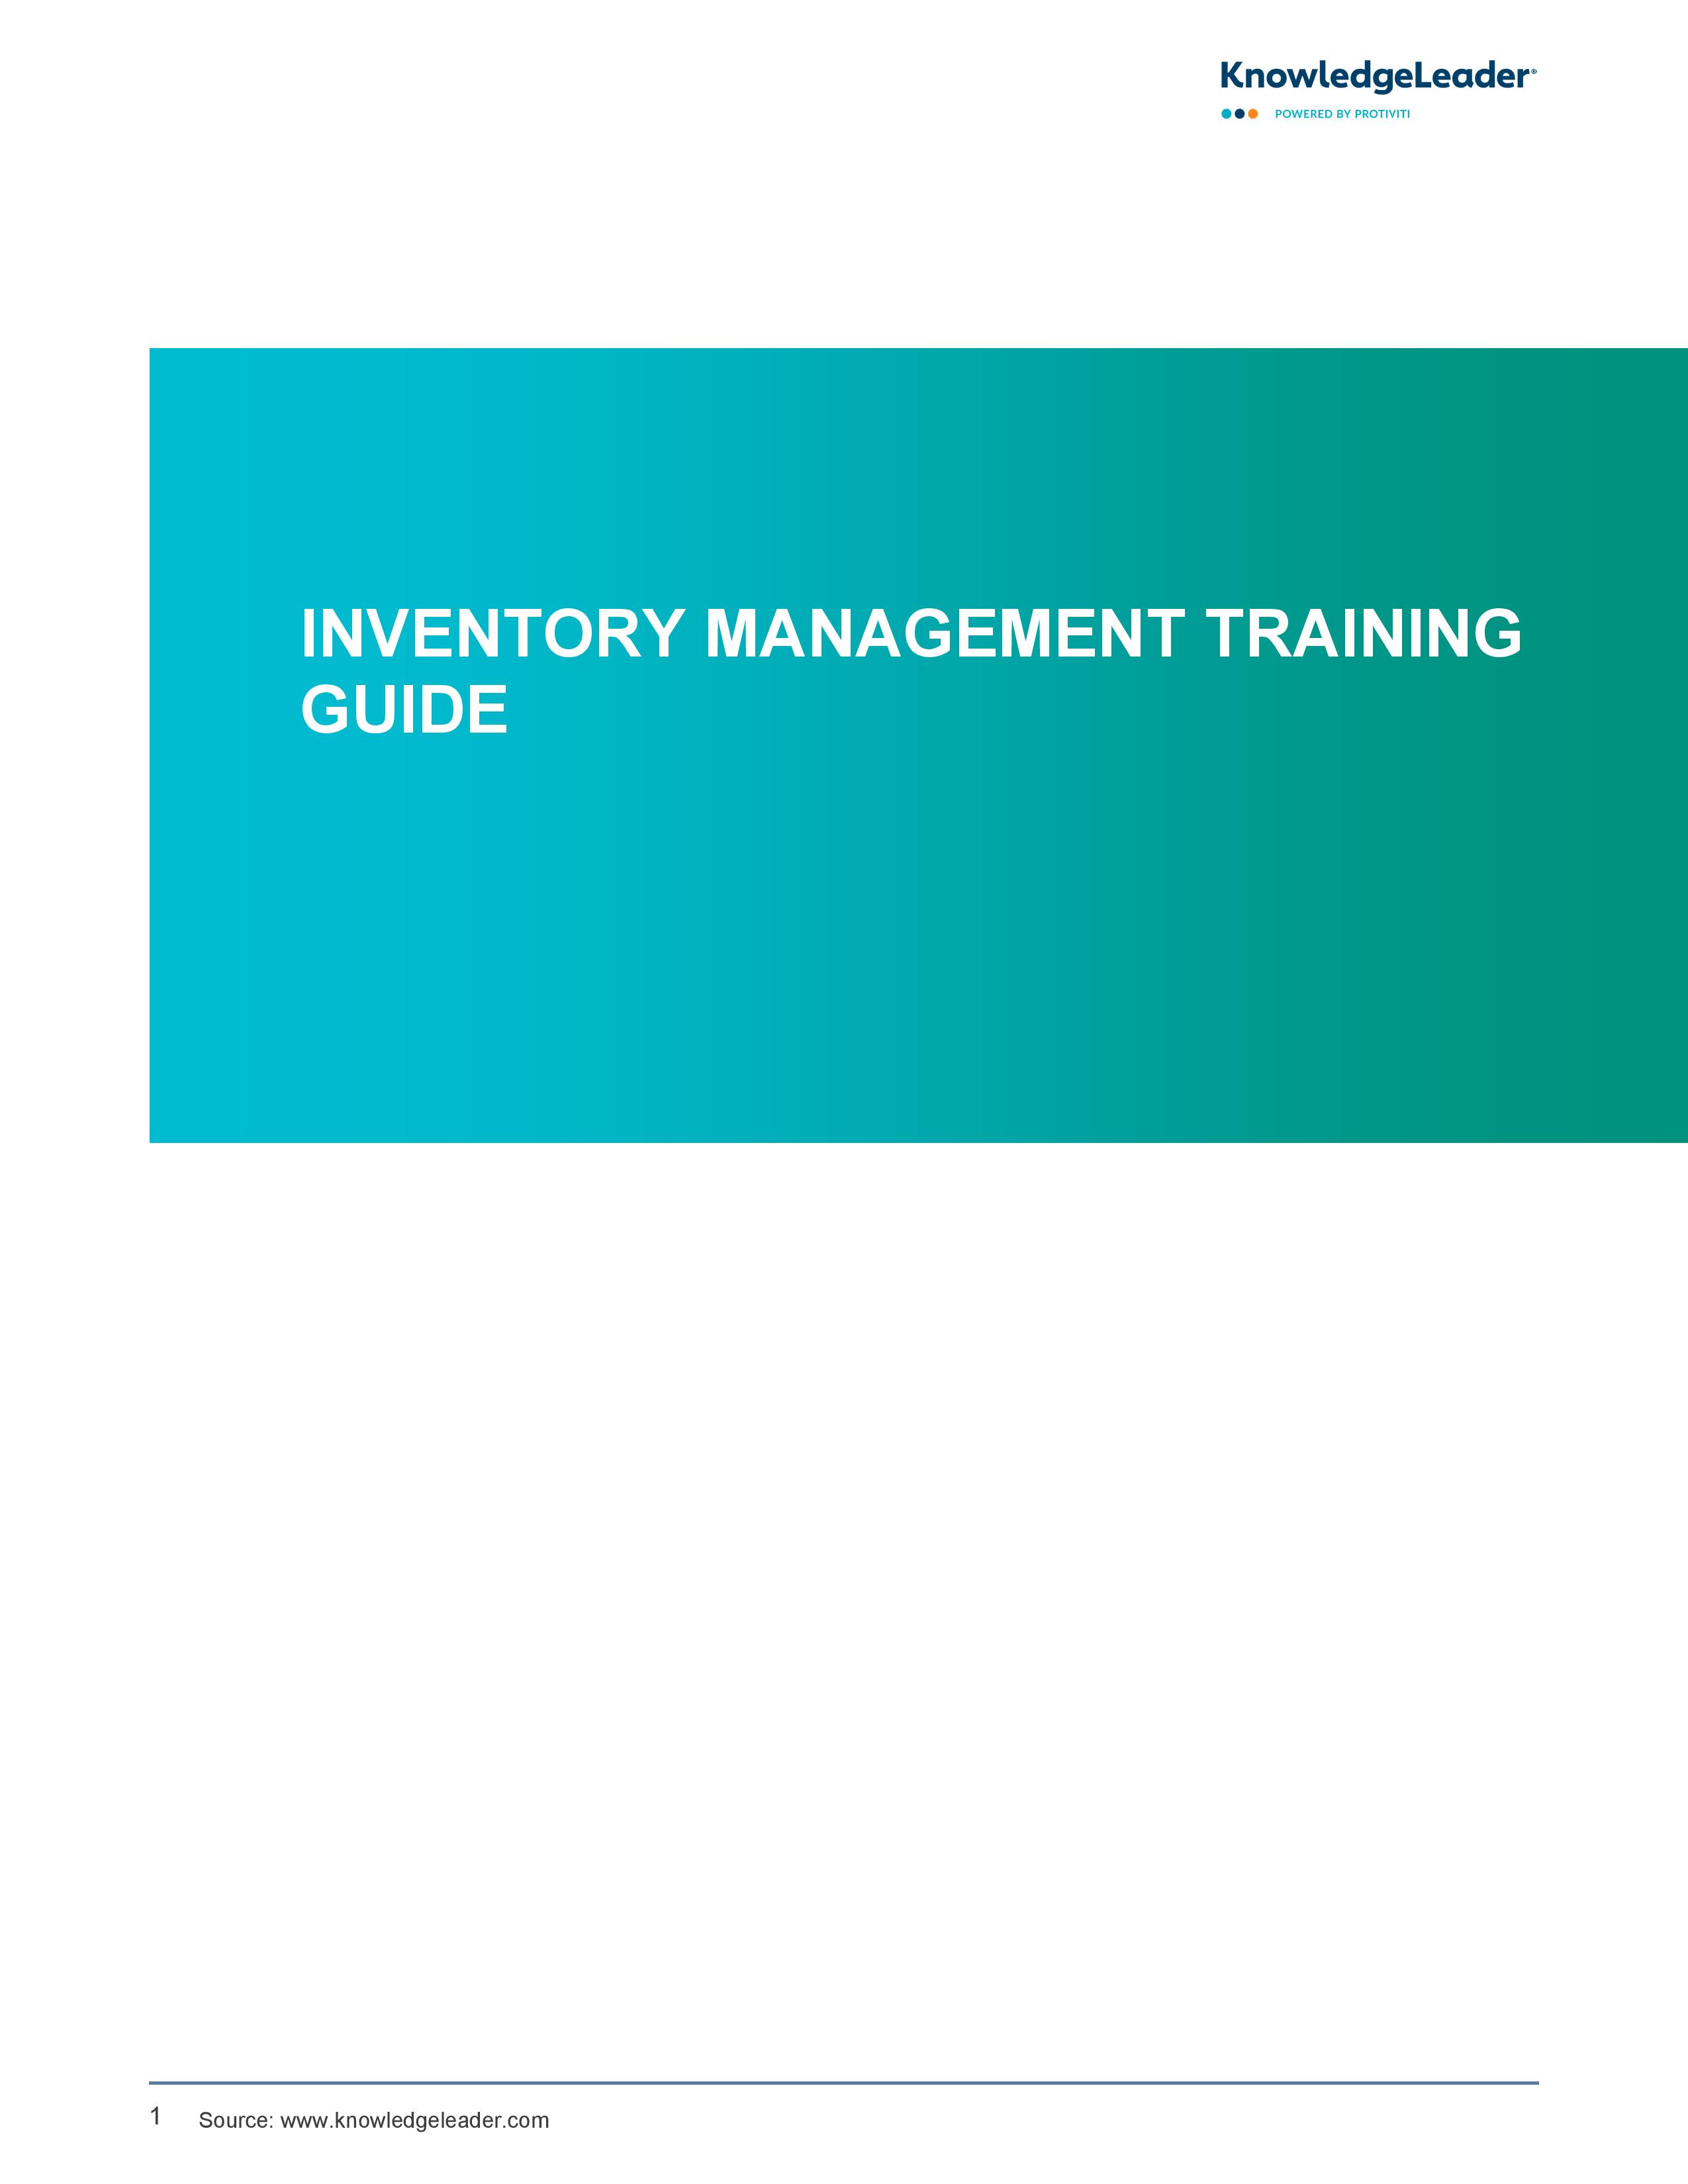 screenshot of the first page of Inventory Management Training Guide